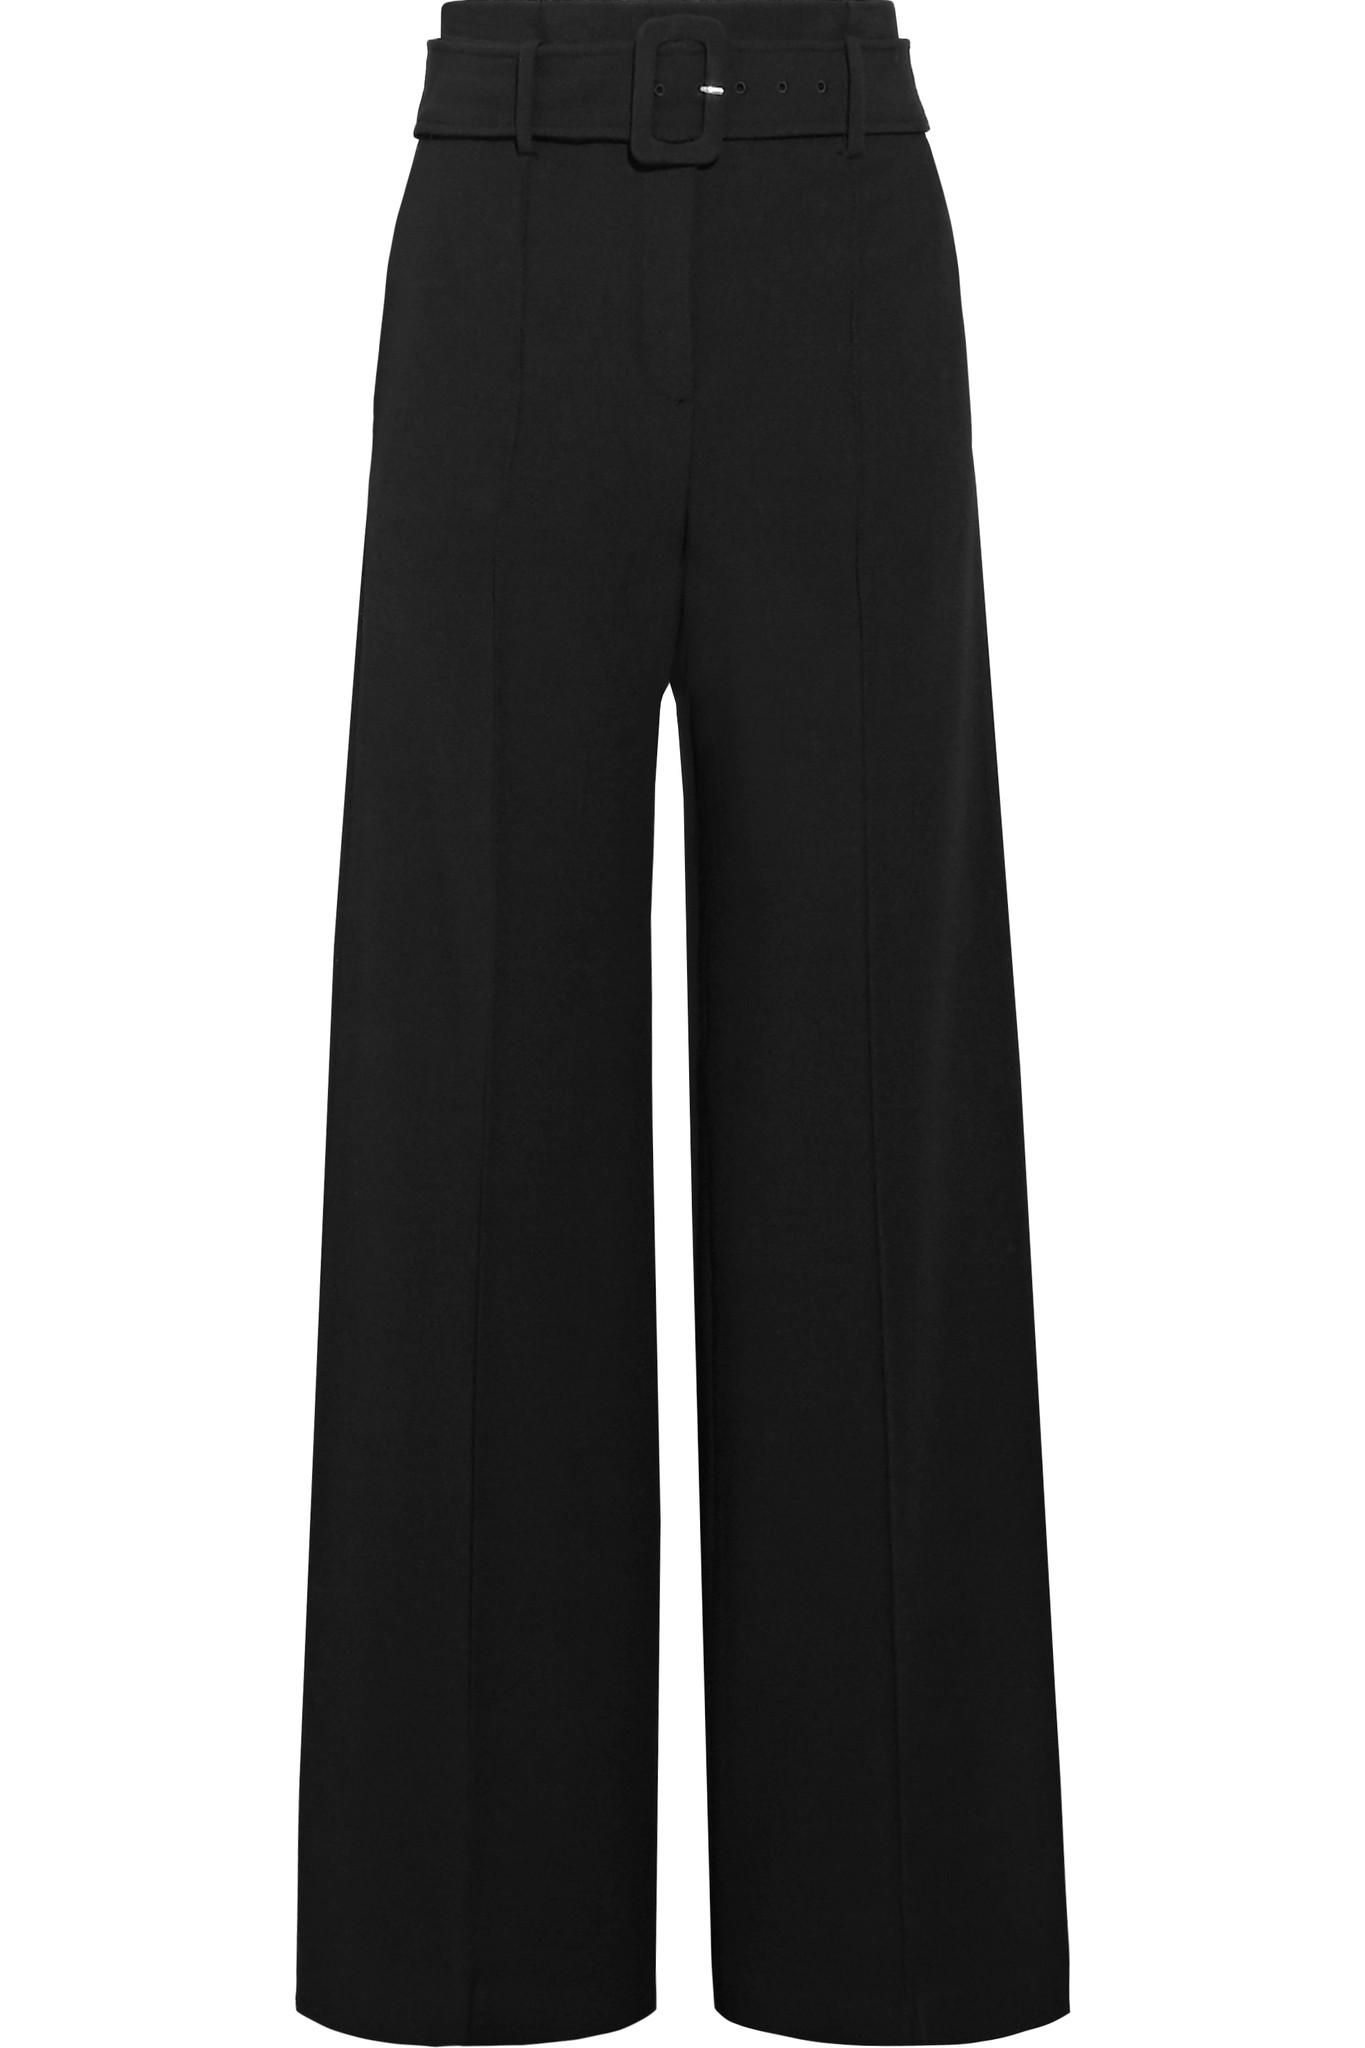 Lyst - Theory Belted Crepe Wide-leg Pants in Black